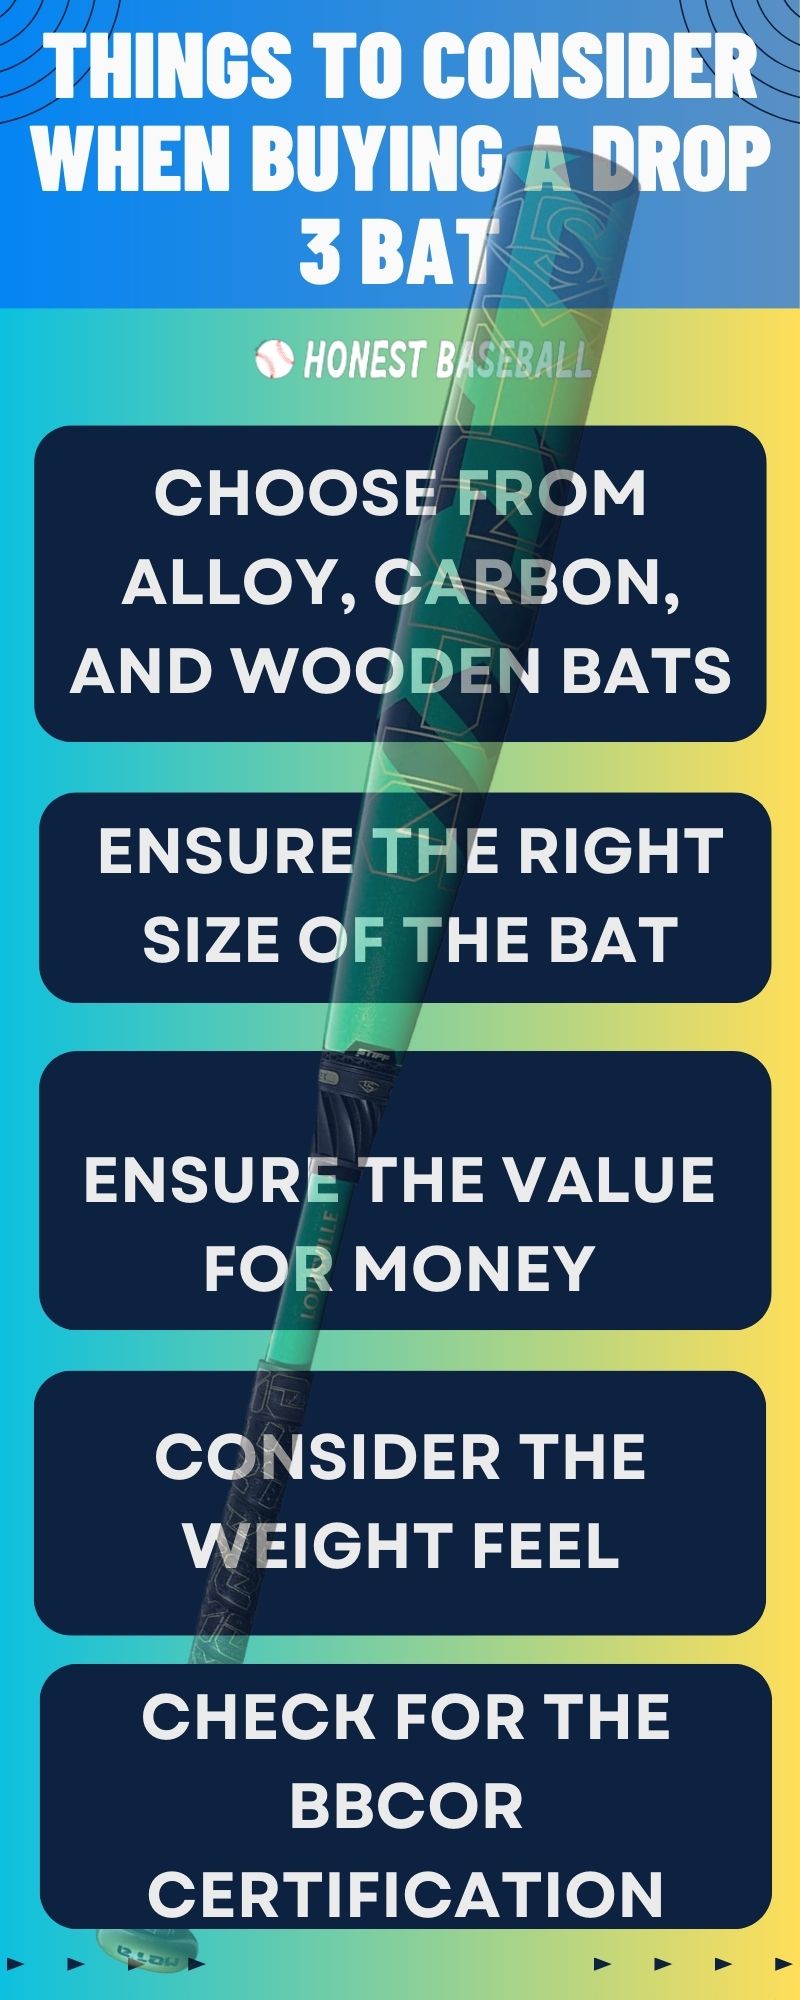 Things to Consider When Buying a Drop 3 Bat